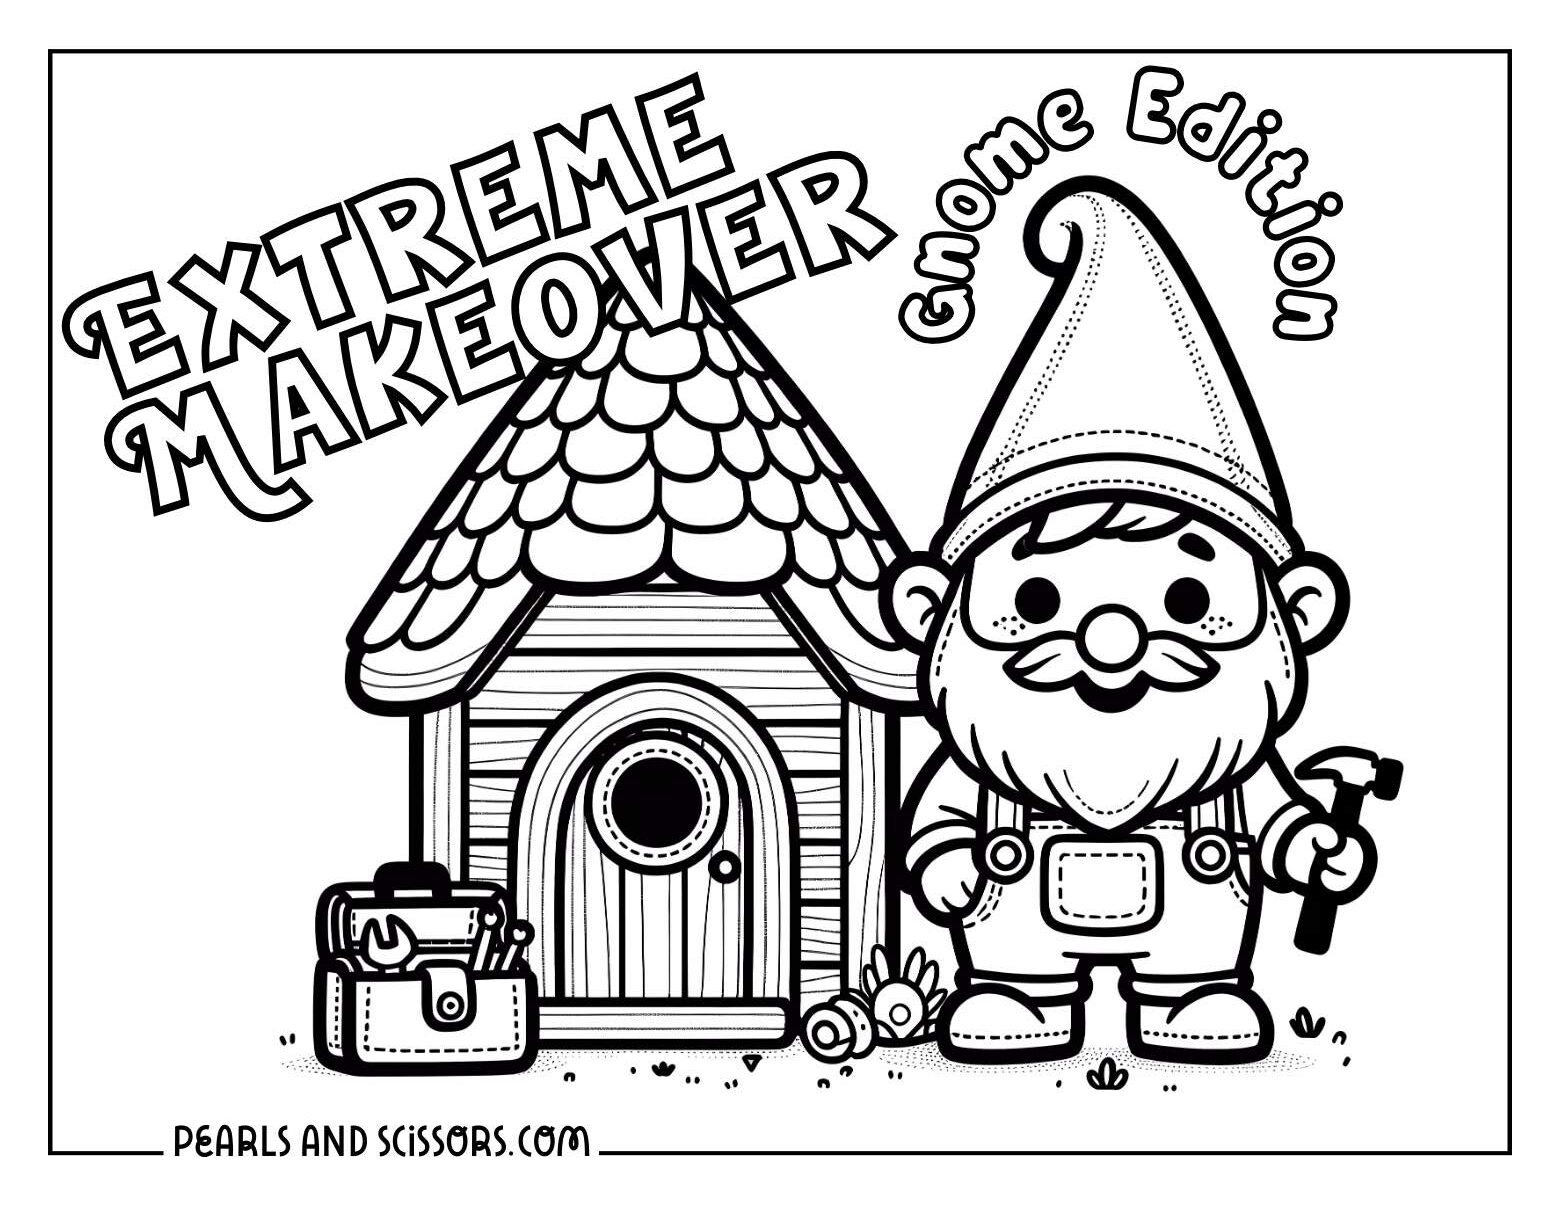 A gnome construction worker doing an extreme makeover christmas coloring page.